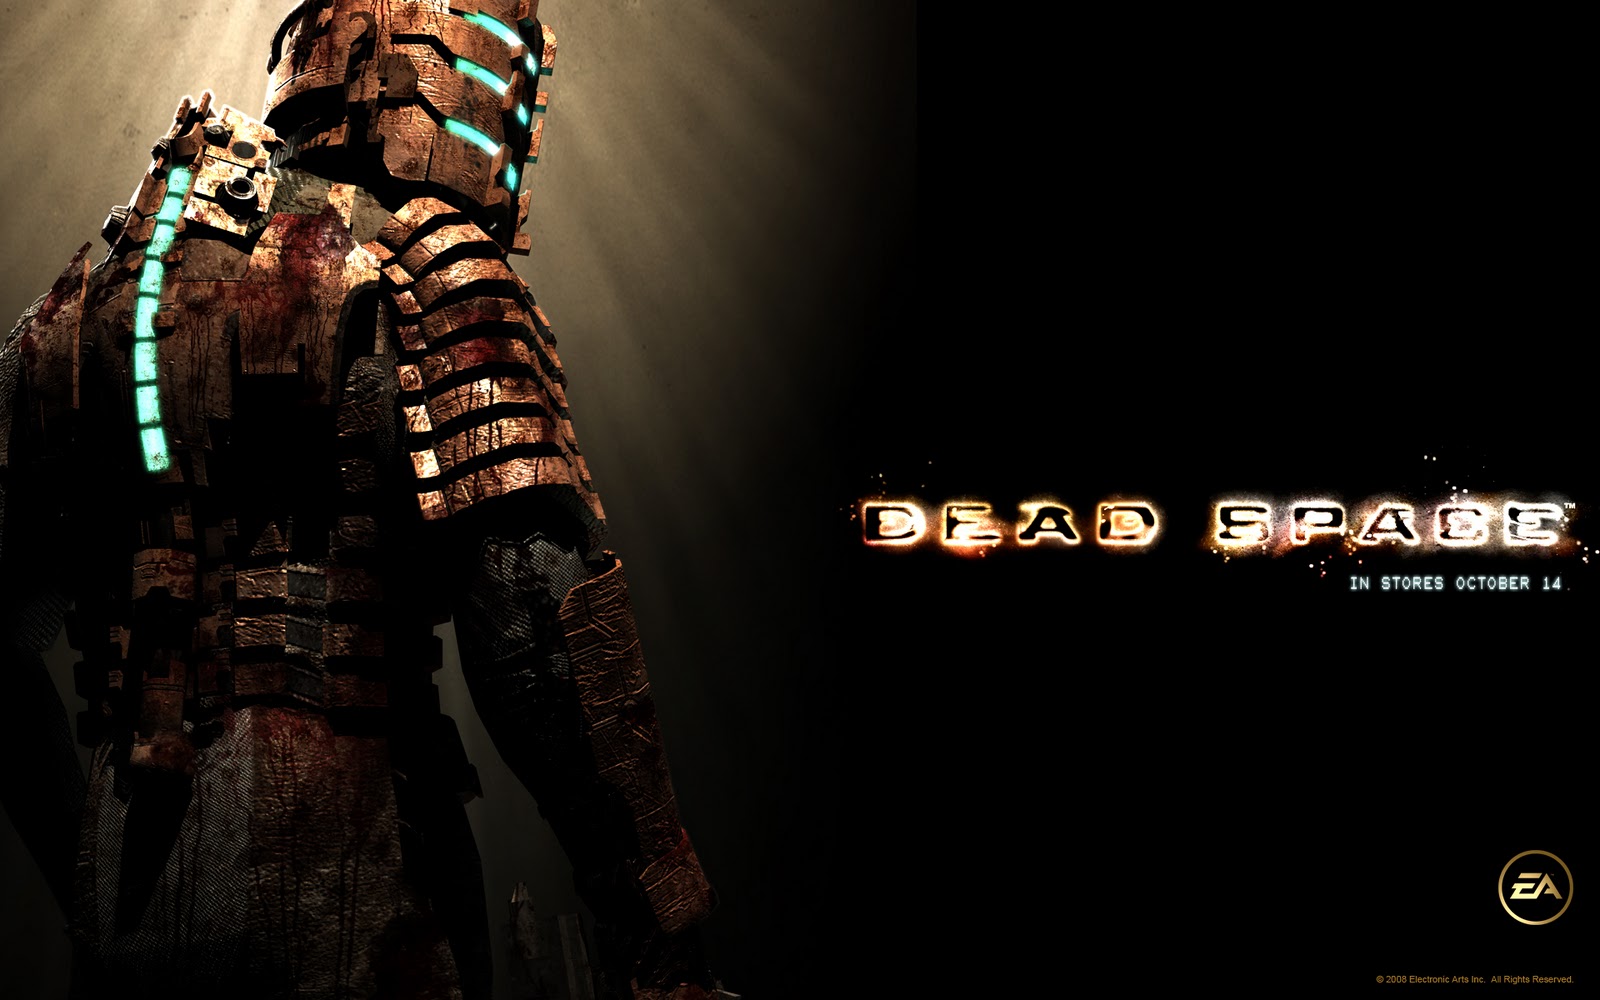 Wallpaper  1920x1051 px Dead Space 1920x1051  CoolWallpapers  742062   HD Wallpapers  WallHere